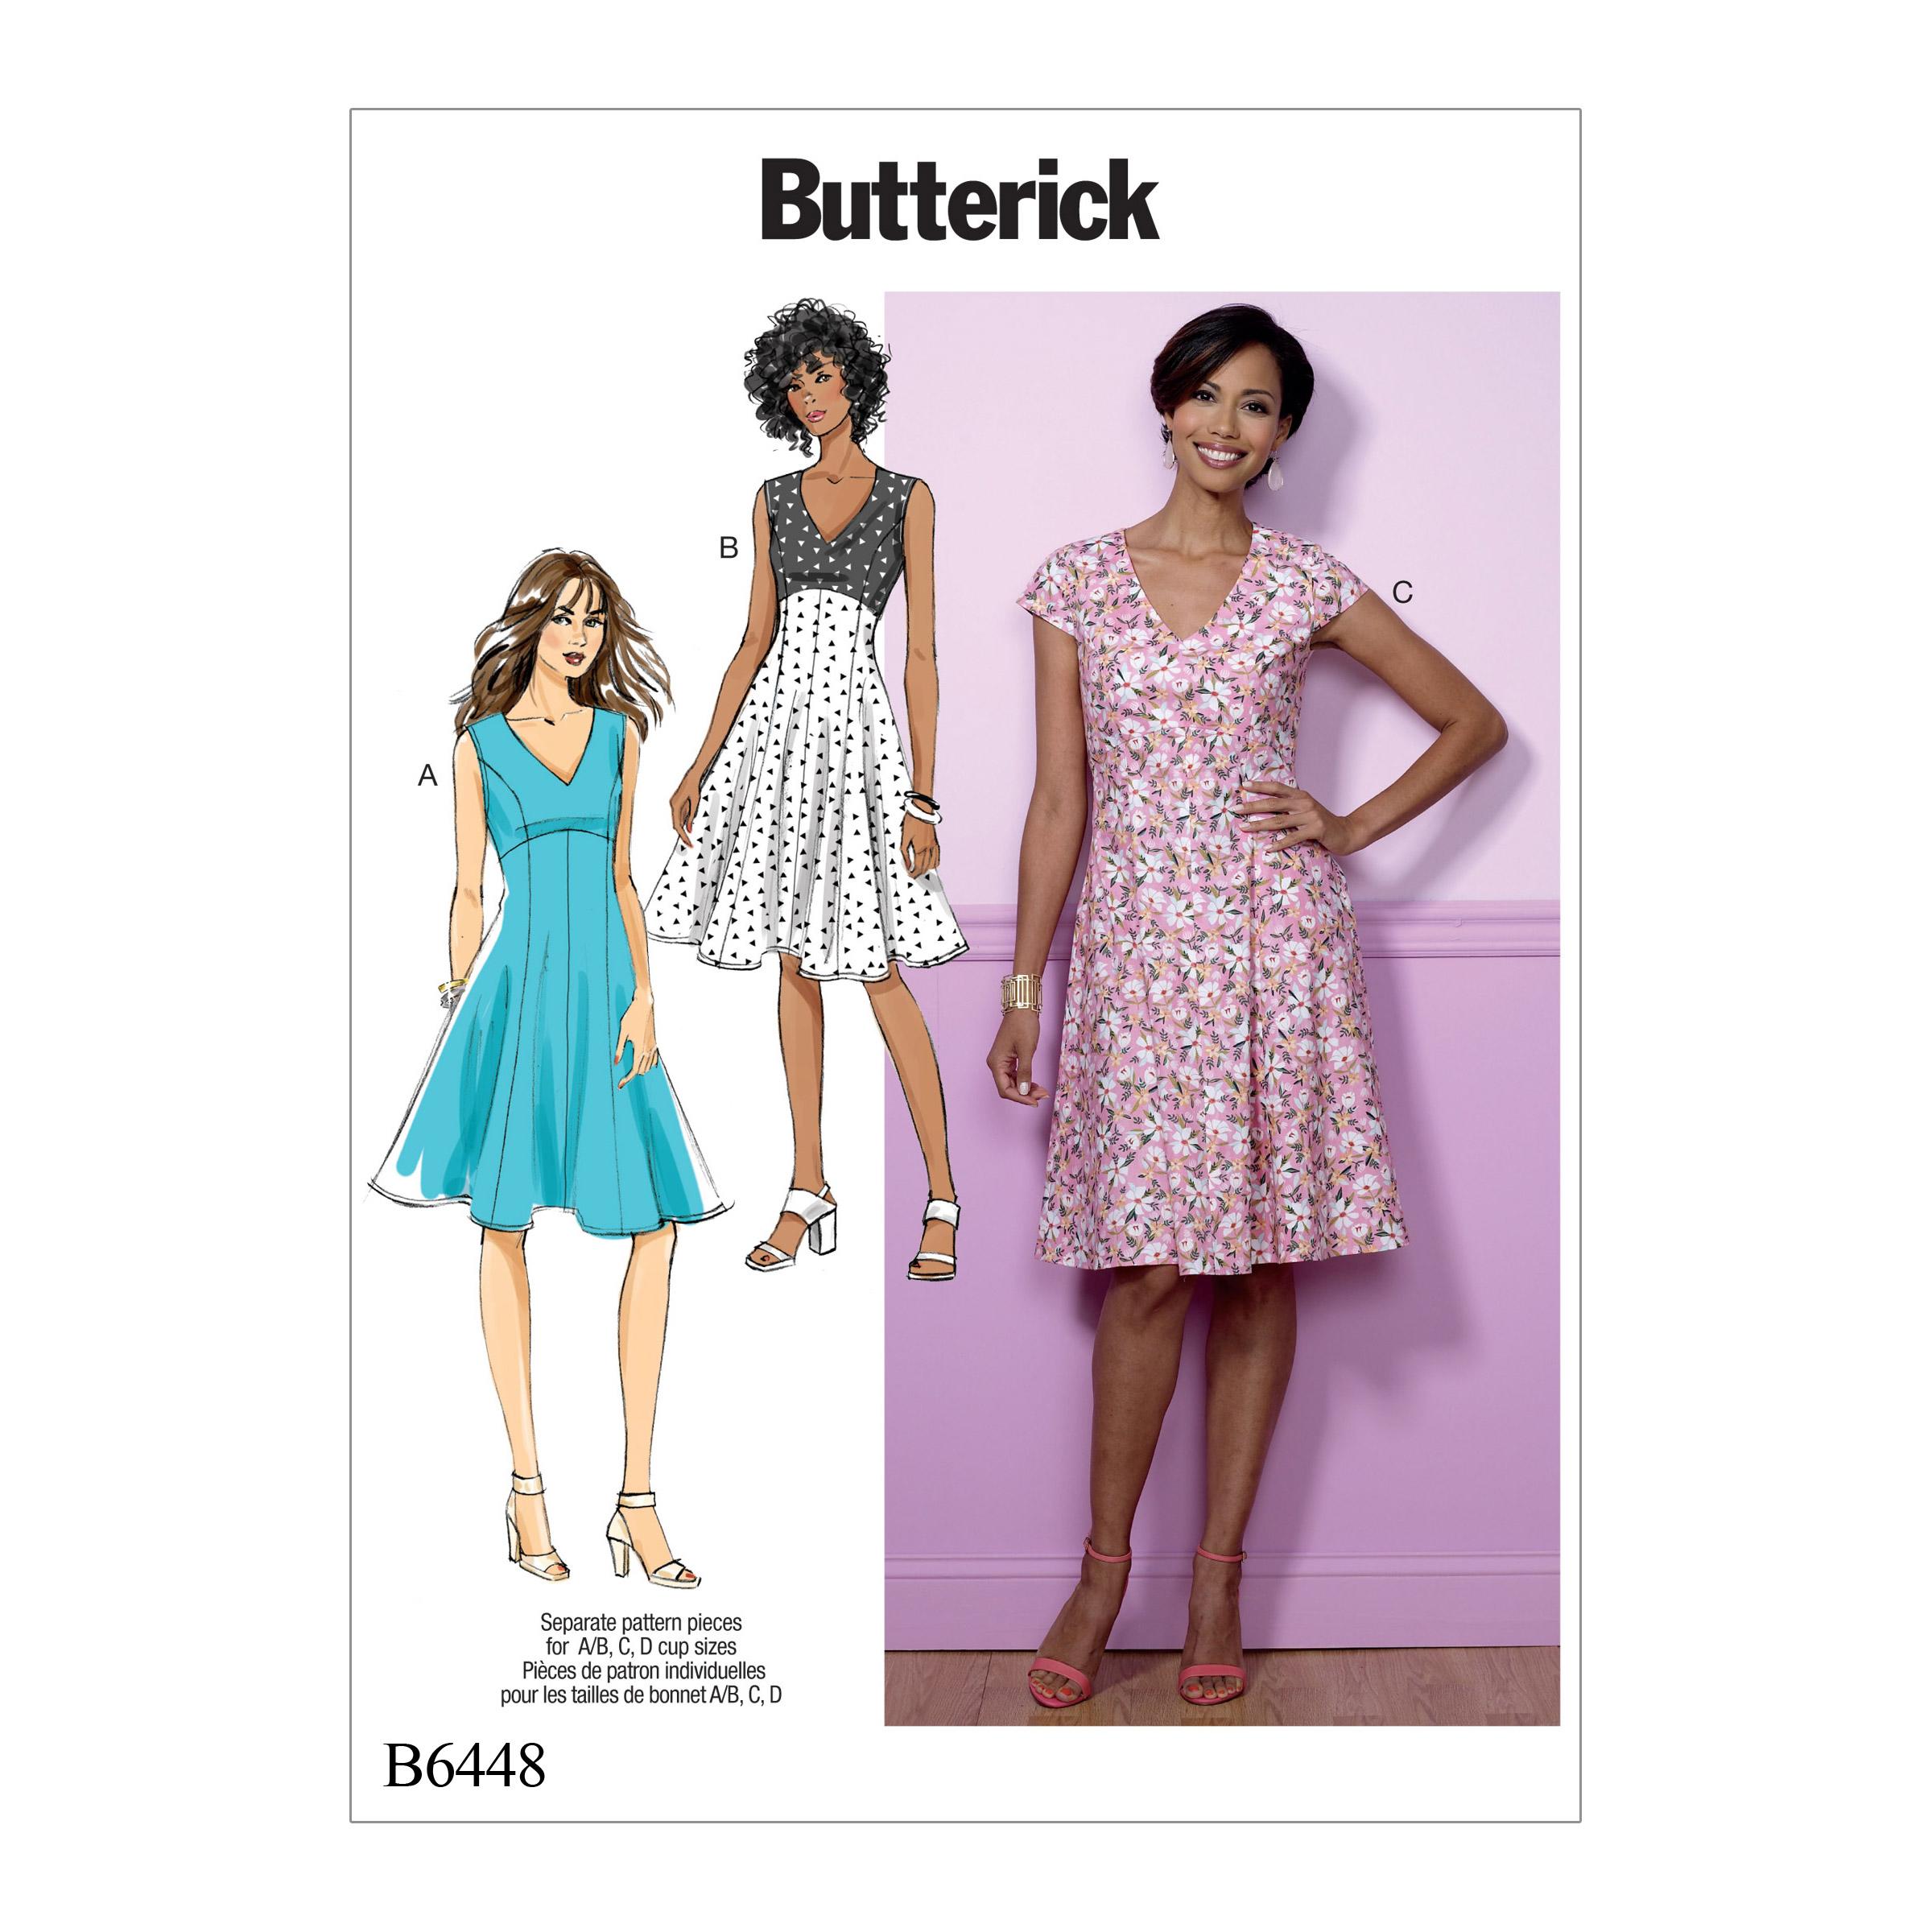 Butterick B6448 Misses' Fit-and-Flare, Empire-Waist Dresses